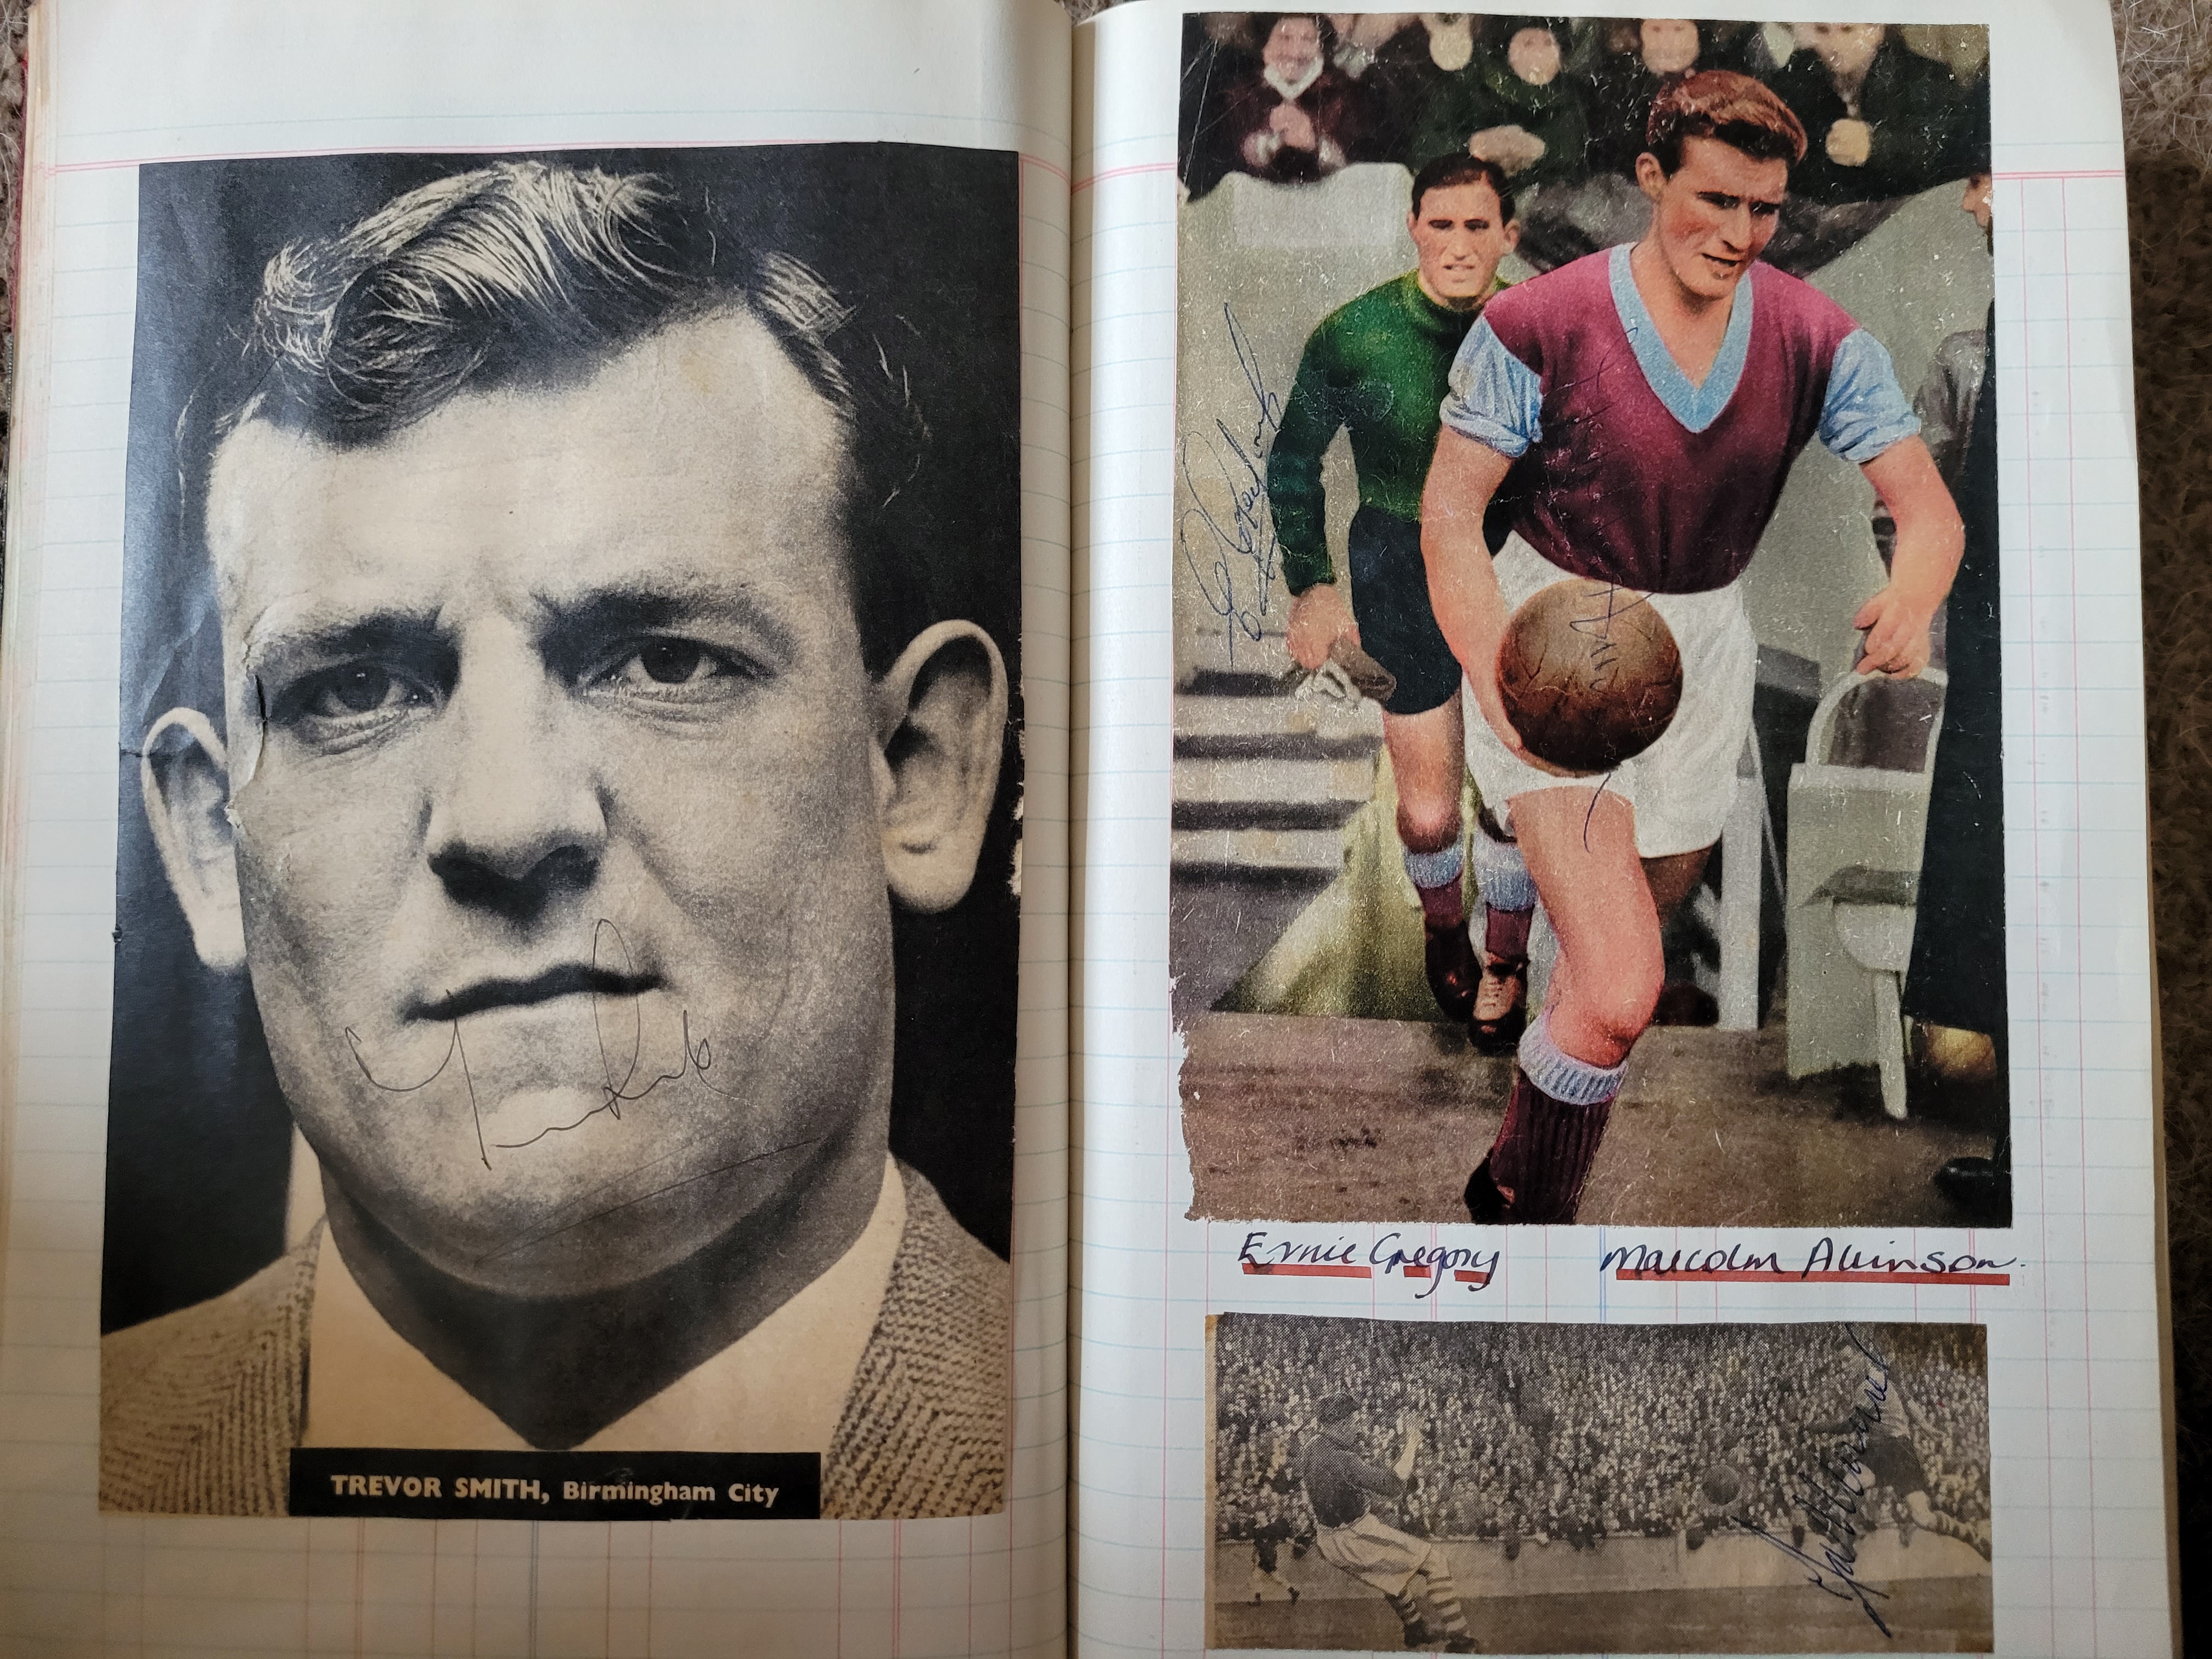 BOOK CONTAINING OVER 1,300 AUTOGRAPHED PICTURES INC' 4 OF MANCHESTER UNITED'S DUNCAN EDWARDS - Image 41 of 160